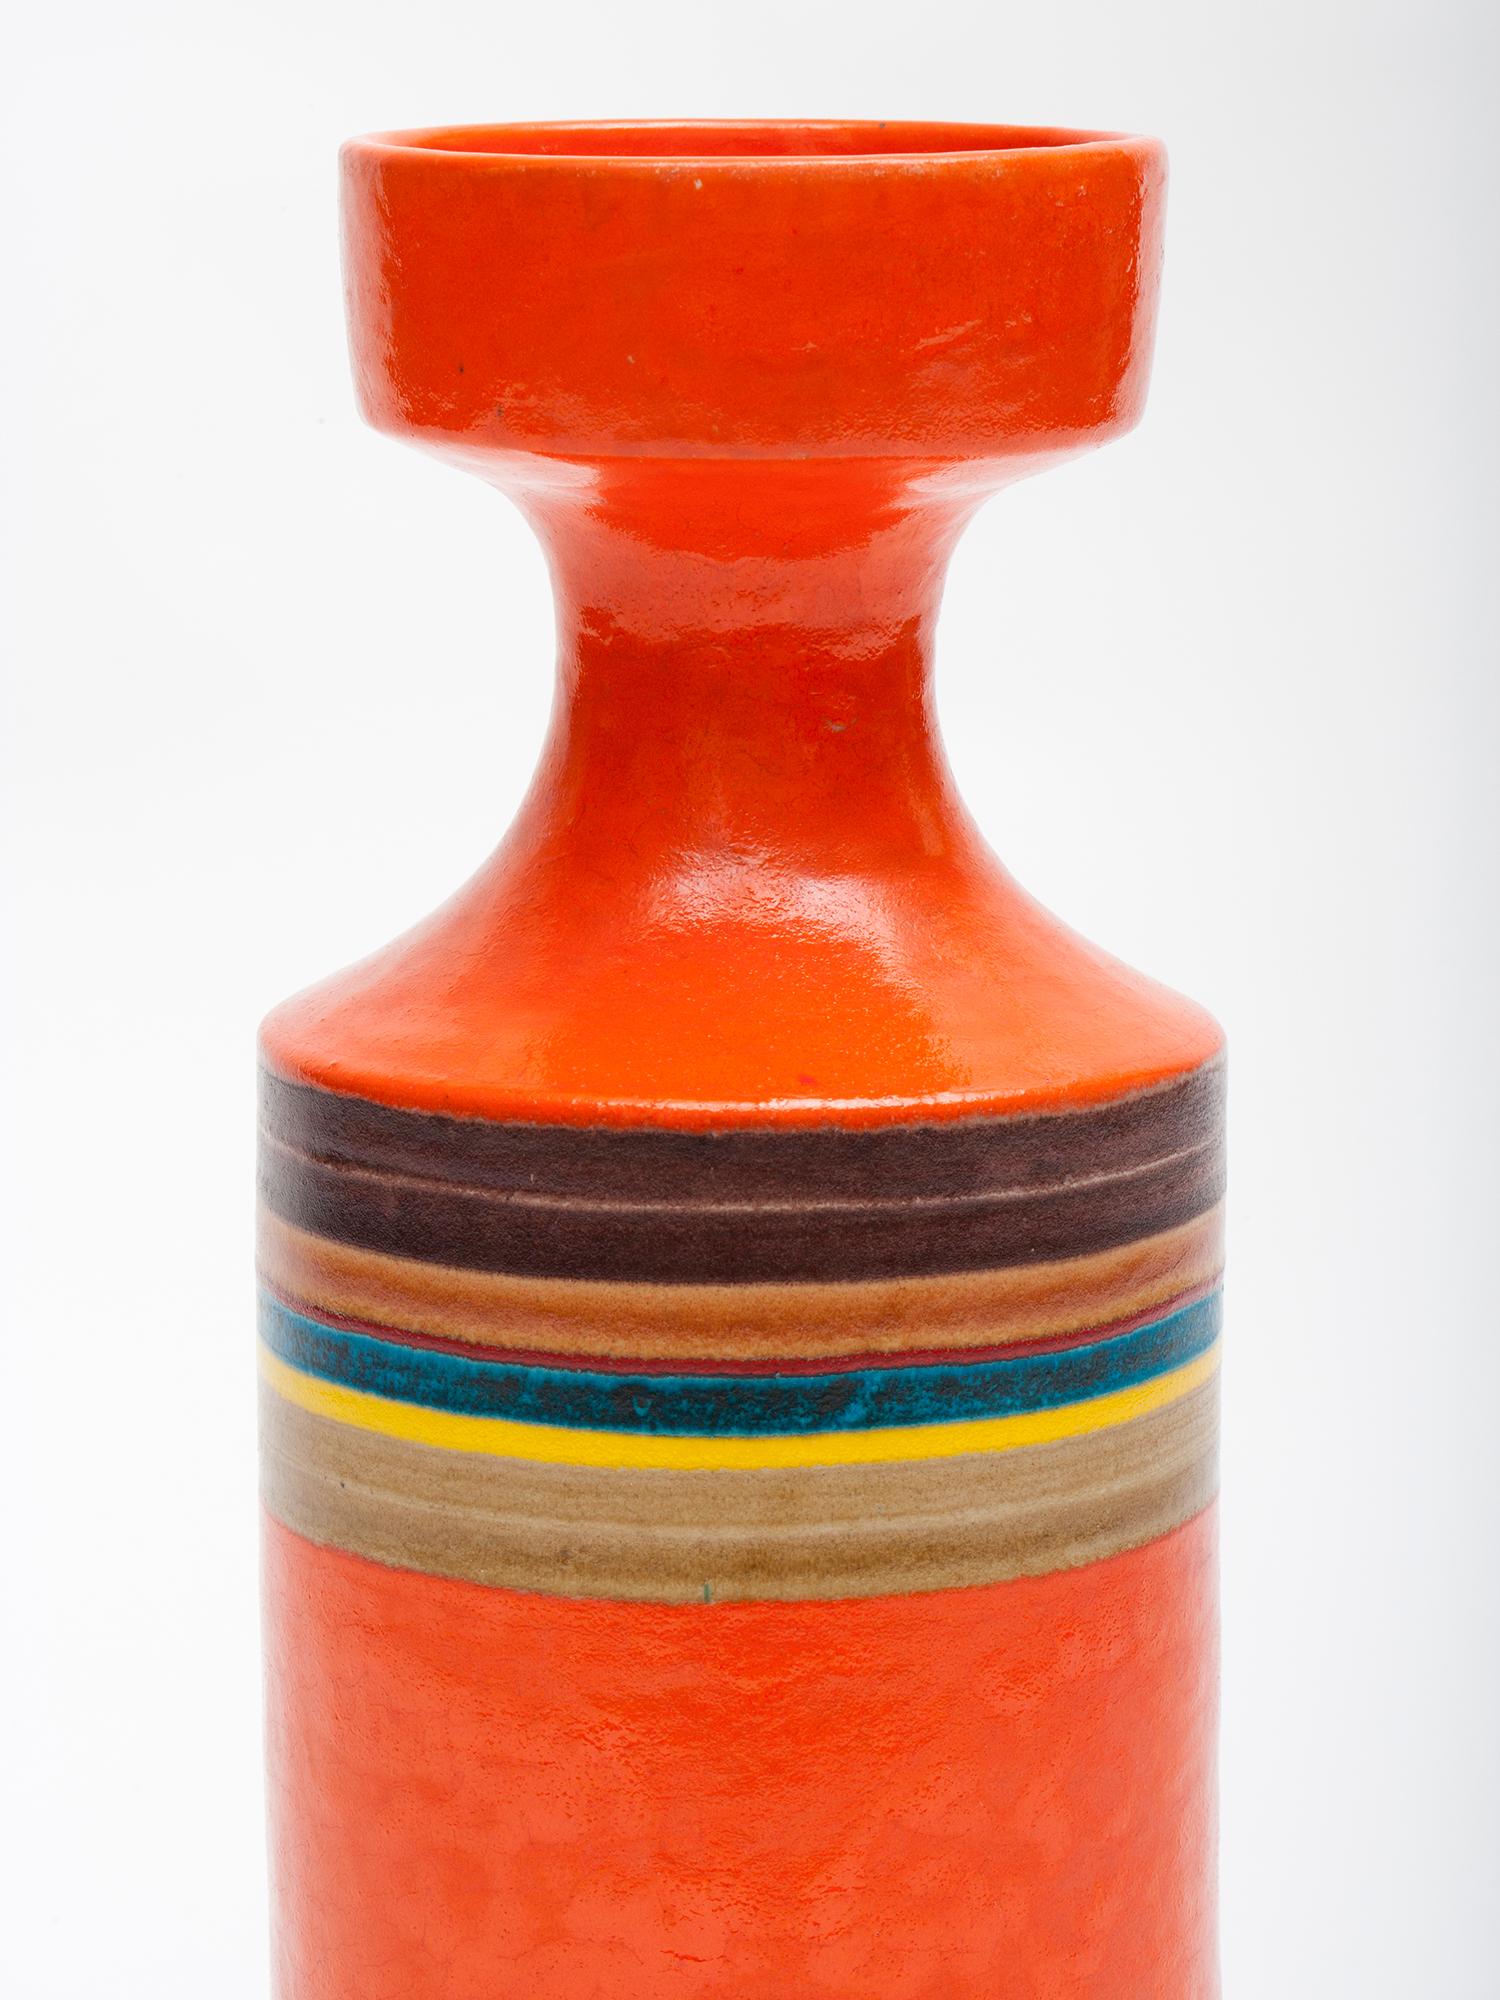 Huge, vibrant orange hand-thrown ceramic vase with colorful striped decoration in brown, yellow and blue. Signed 'Gambone Italy' on the base.